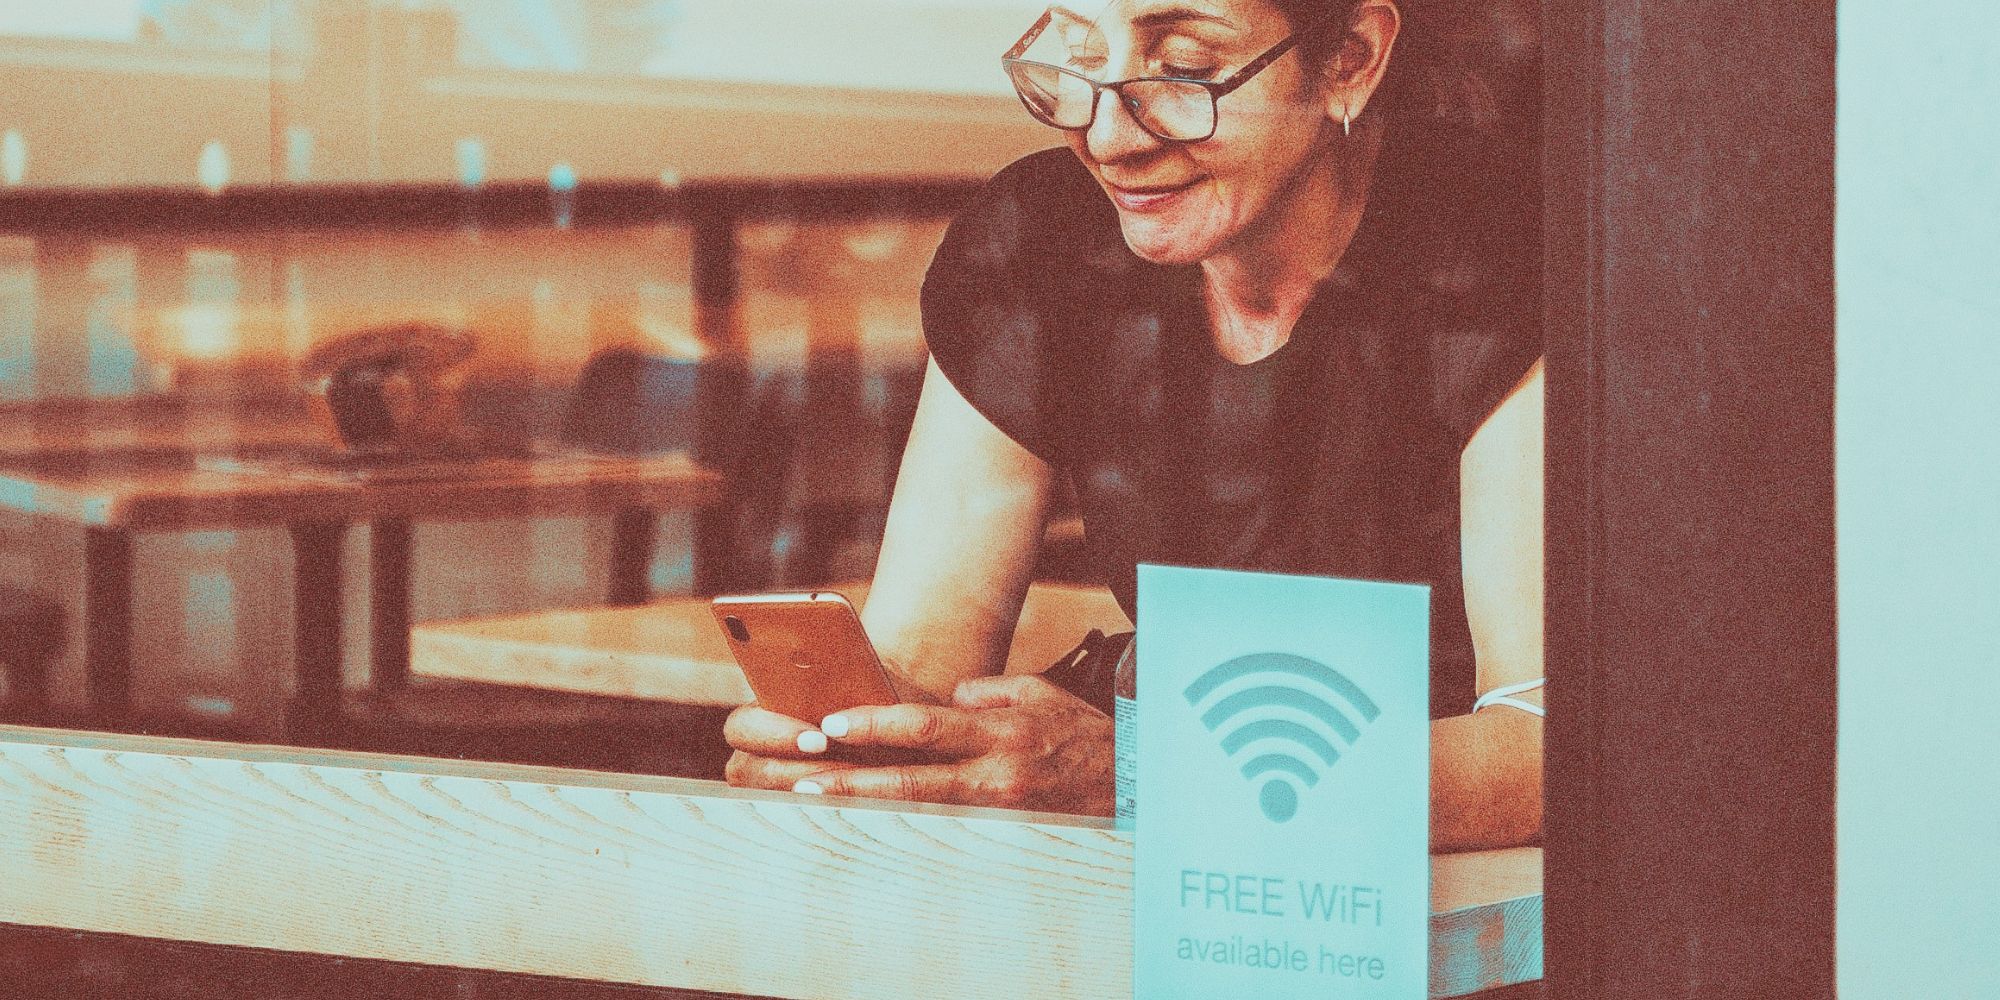 Protect your privacy on public WiFi